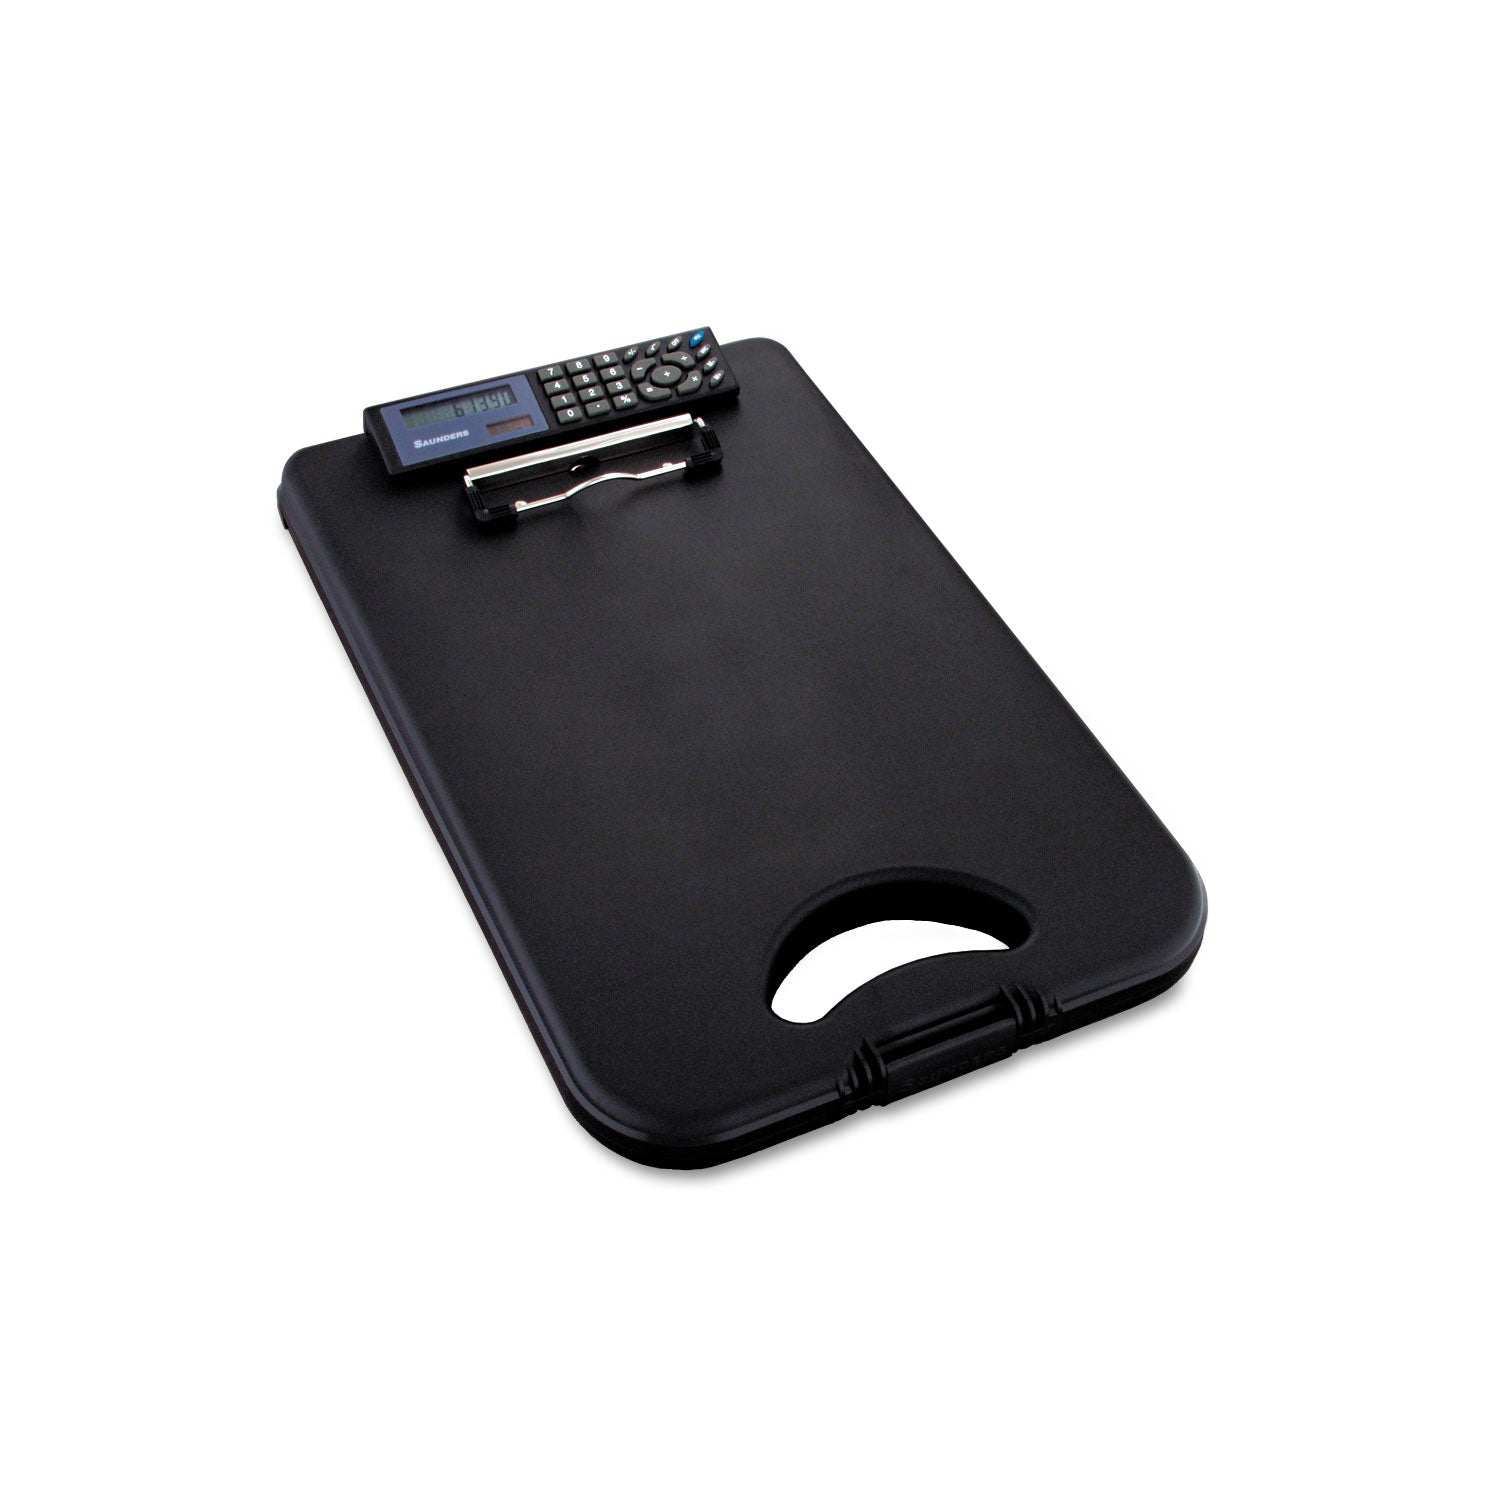 DeskMate II with Calculator, 0.5" Clip Capacity, Holds 8.5 x 11 Sheets, Black - 